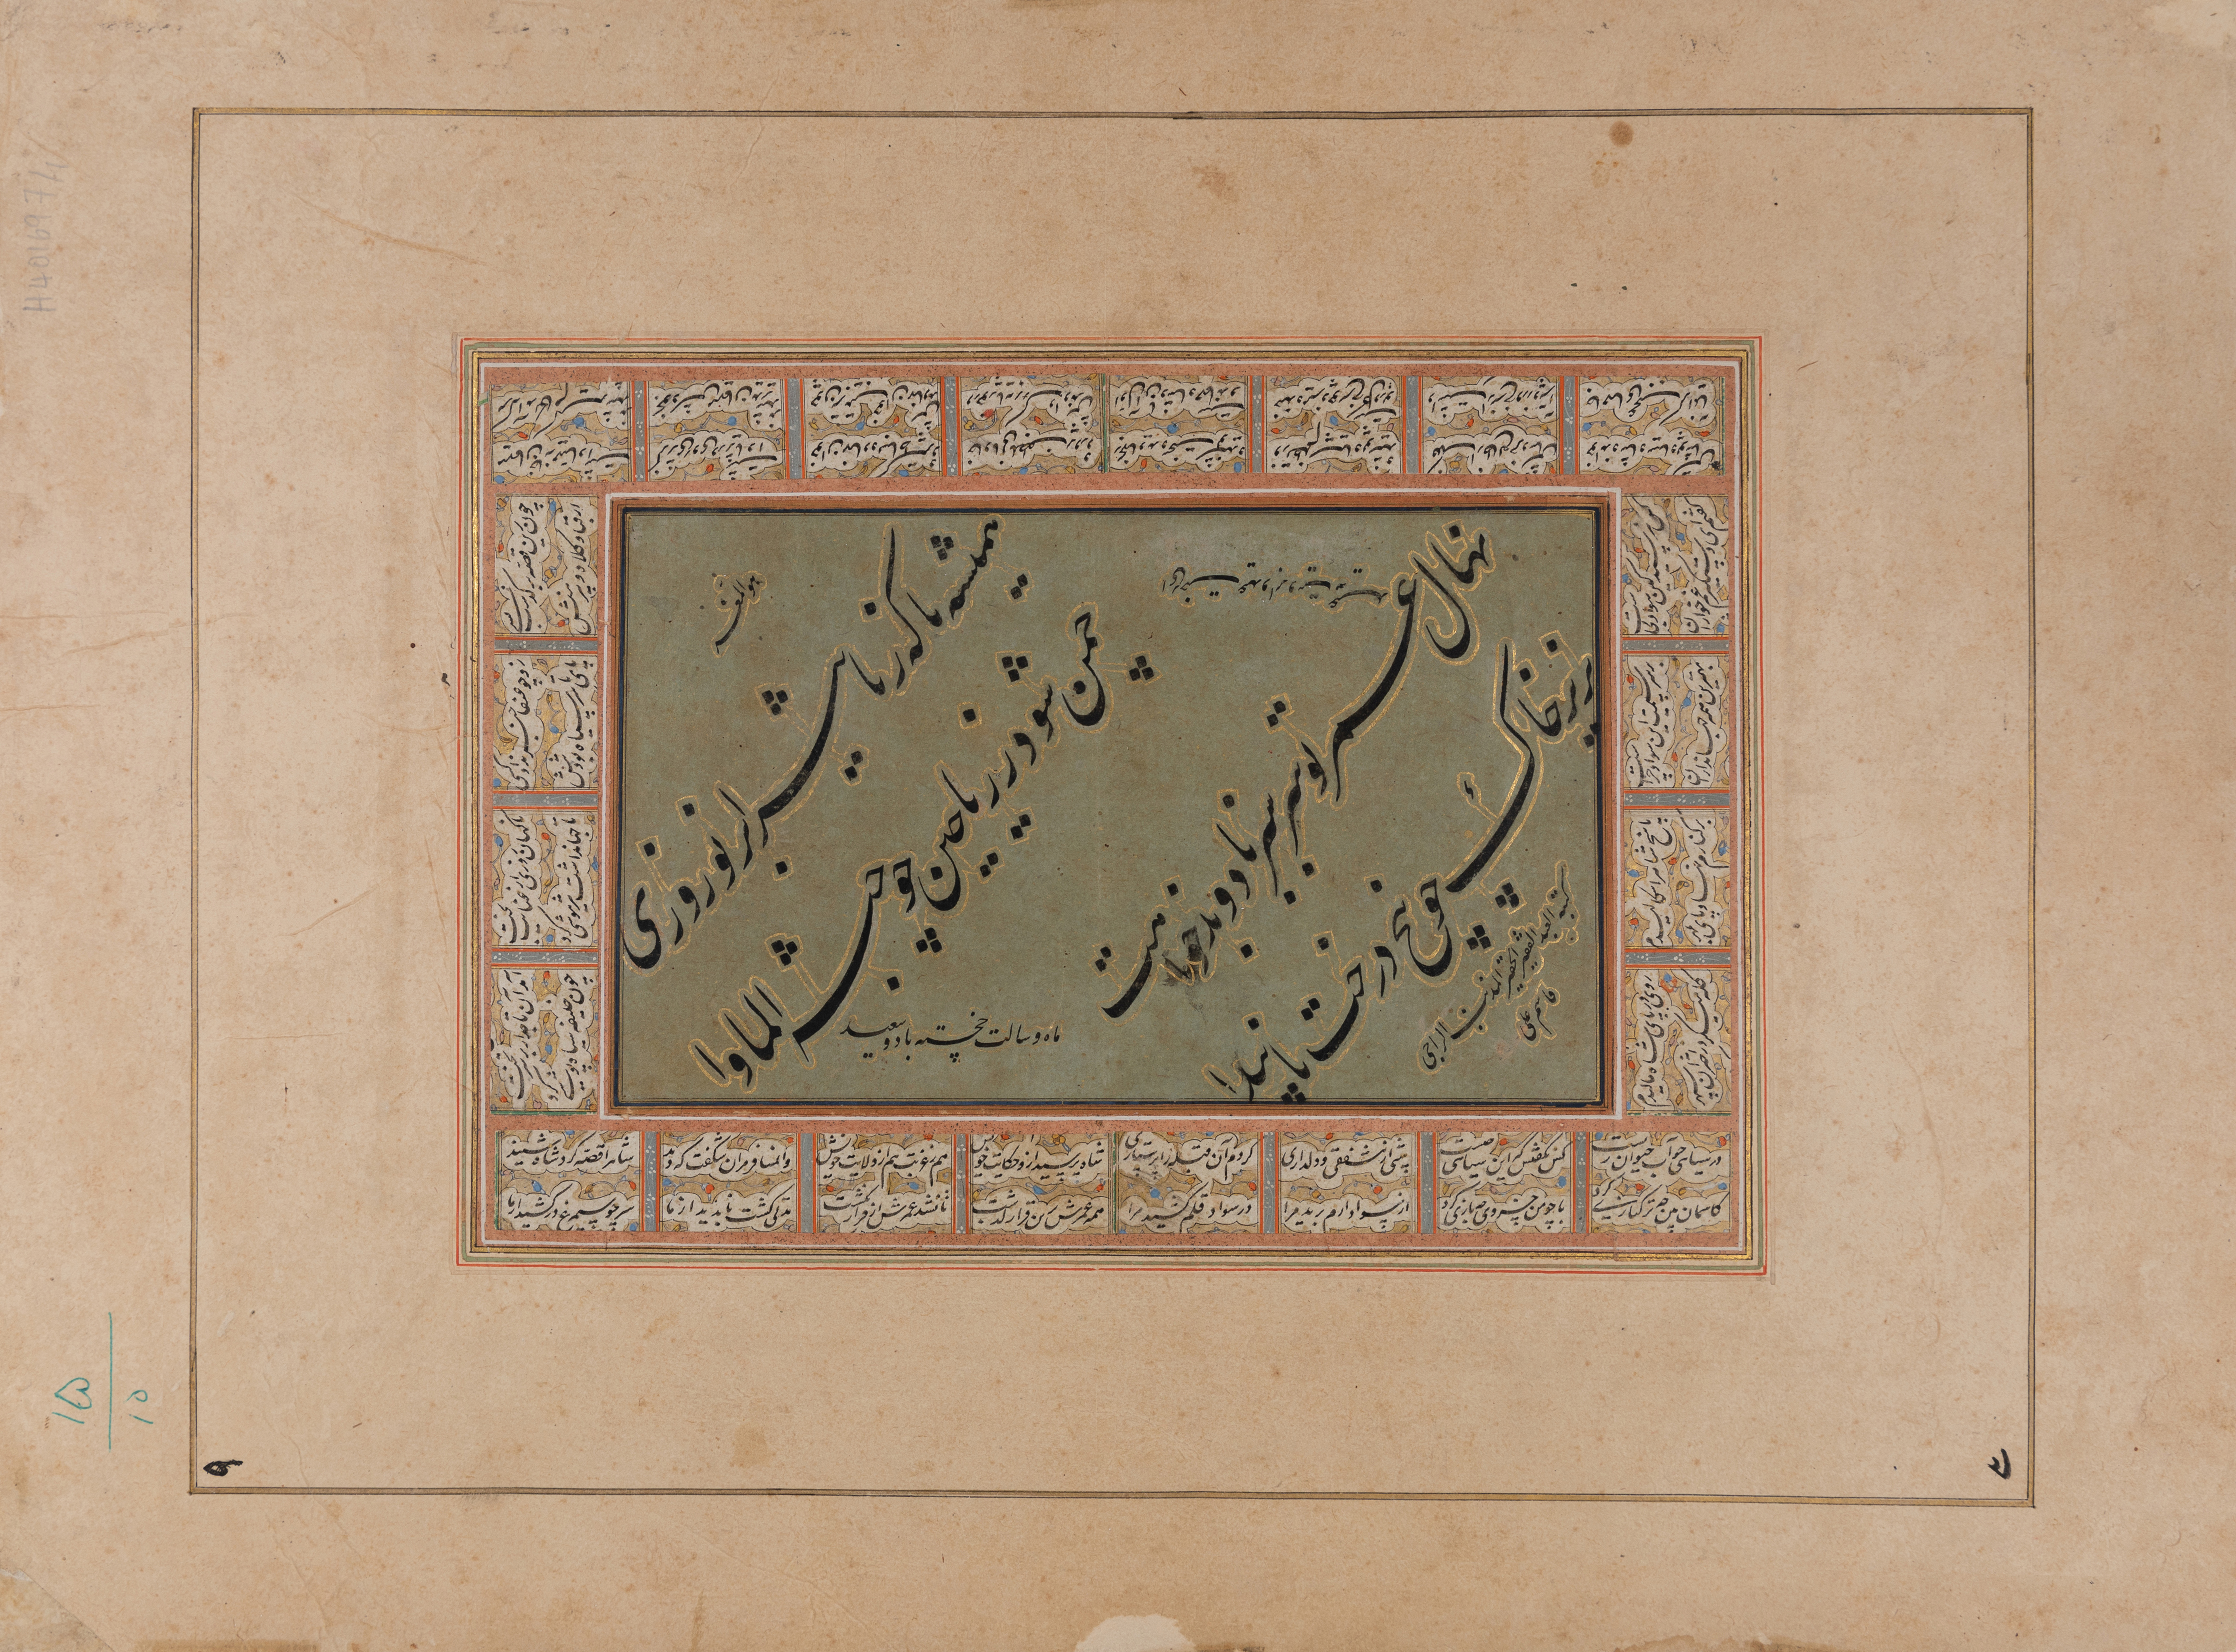 A double-sided album page from the Imperial Mughal Library during the reign of the Emperor Aurang... - Image 2 of 2